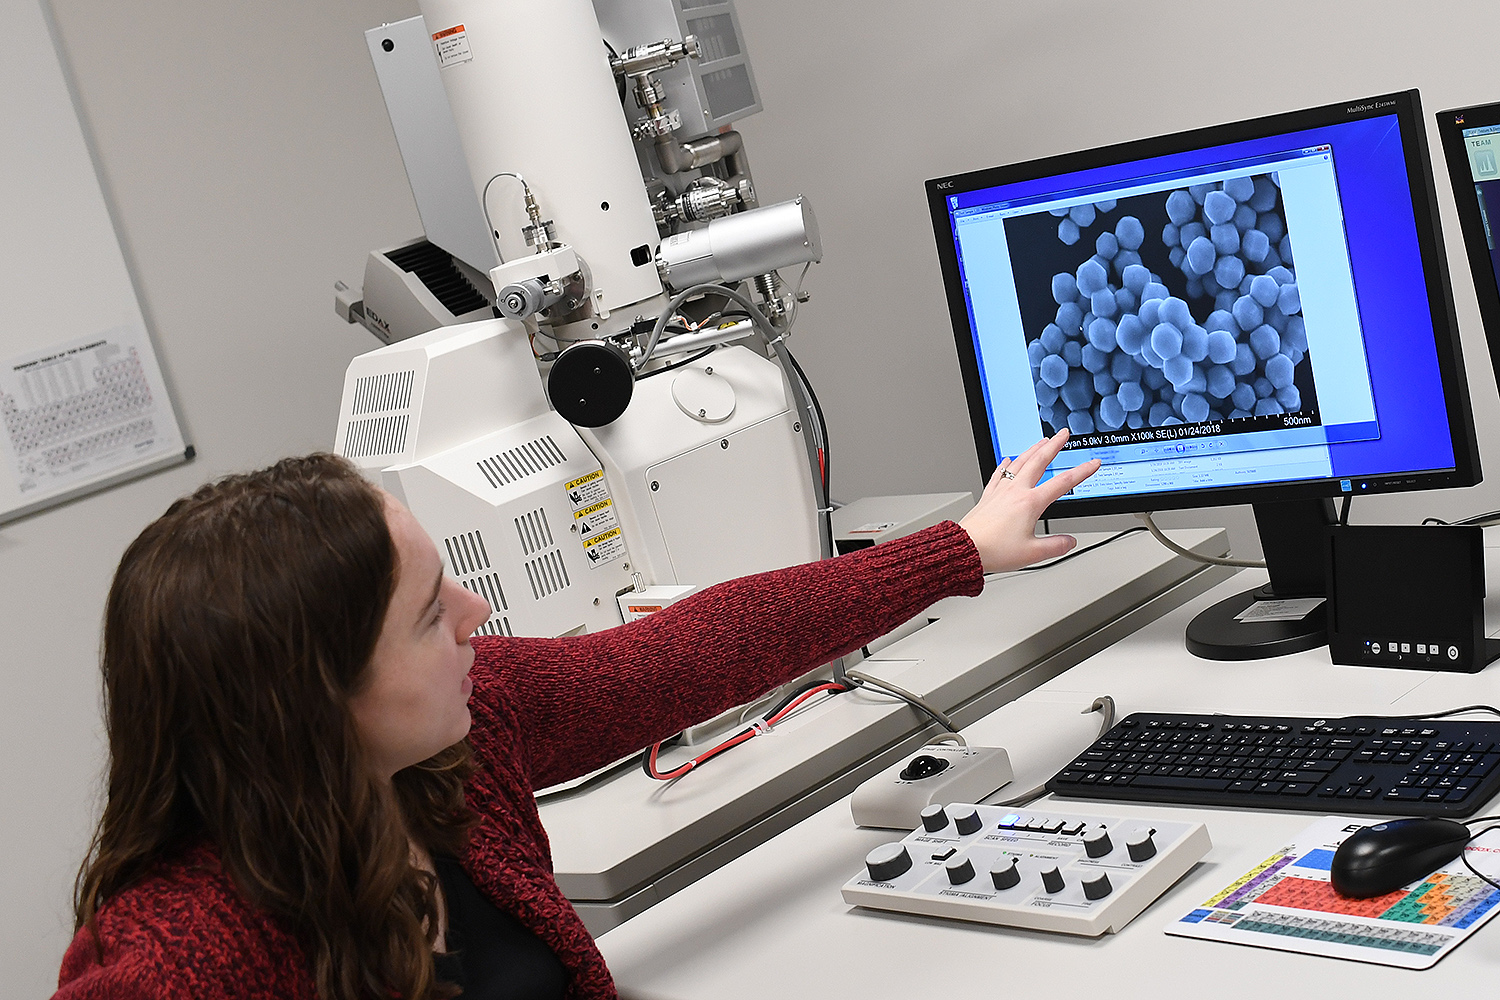 Michelle Personick, assistant professor of chemistry, examines nanoparticles viewed from a new field emission scanning electron microscope.